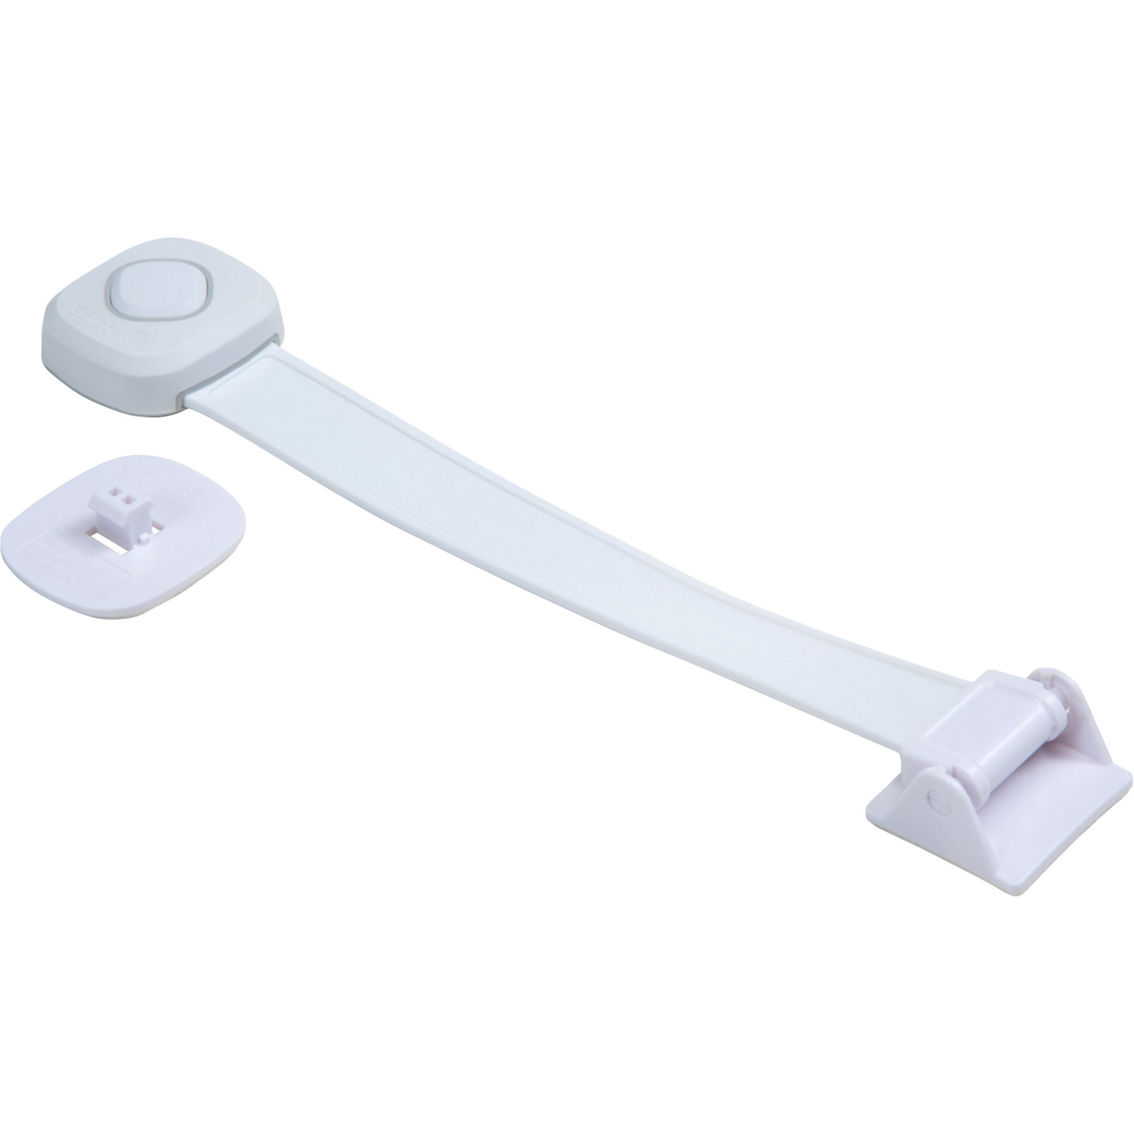 Safety 1st Outsmart Toilet Lock - Image 2 of 4